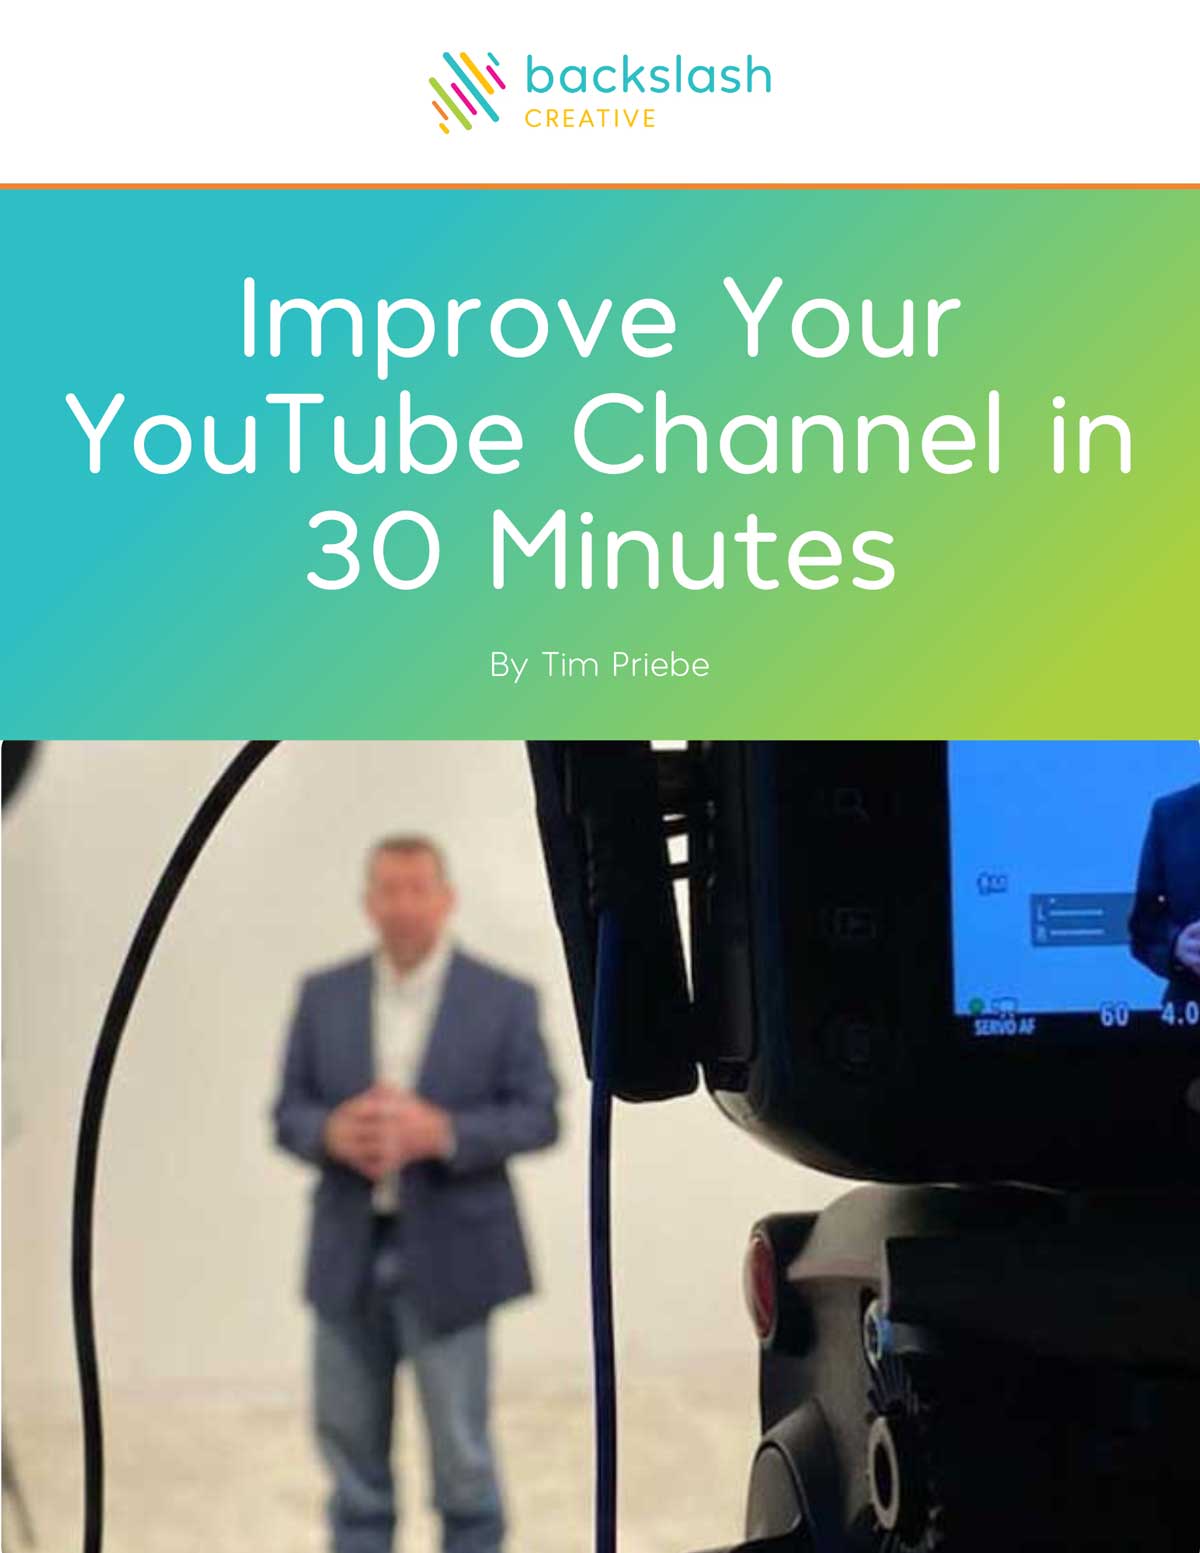 Improve Your YouTube Channel in 30 Minutes